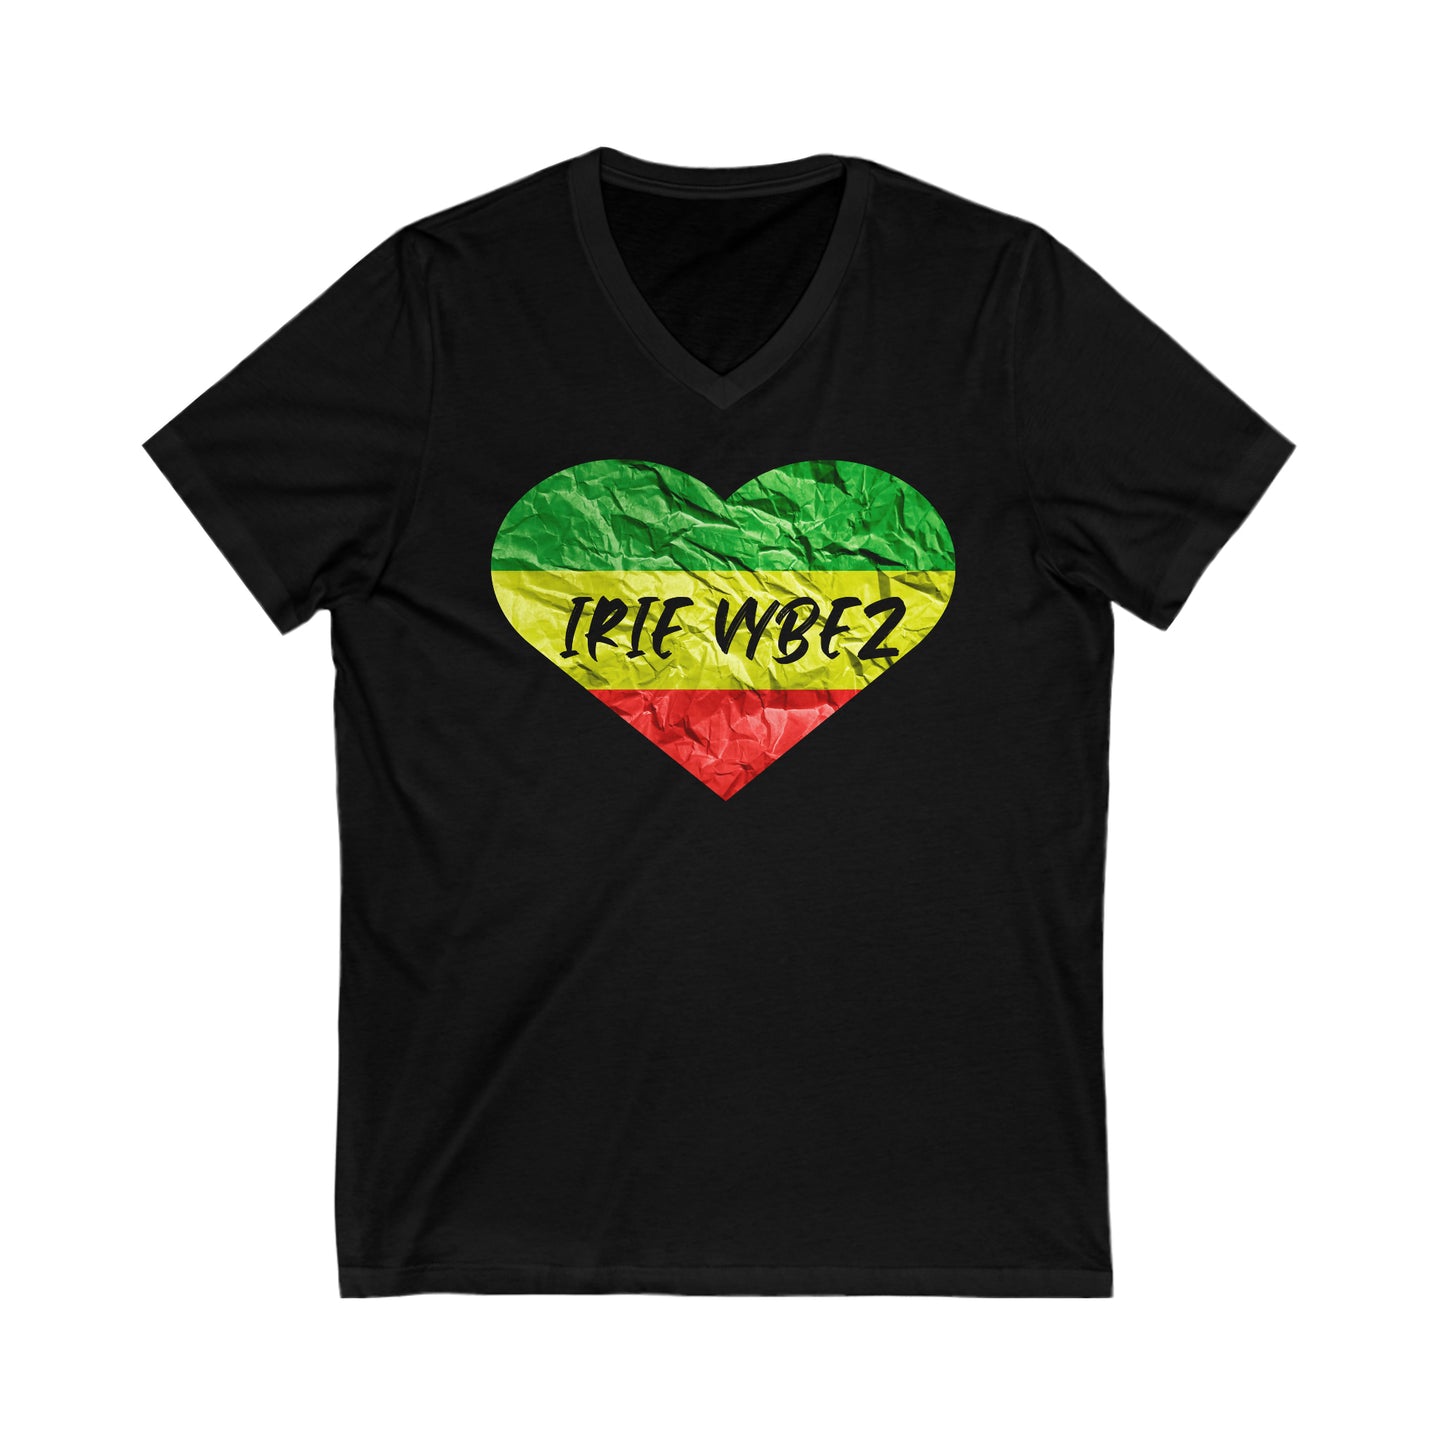 IRIE VYBEZ ROOTS CONSCIOUS V NECK TEE SHIRT